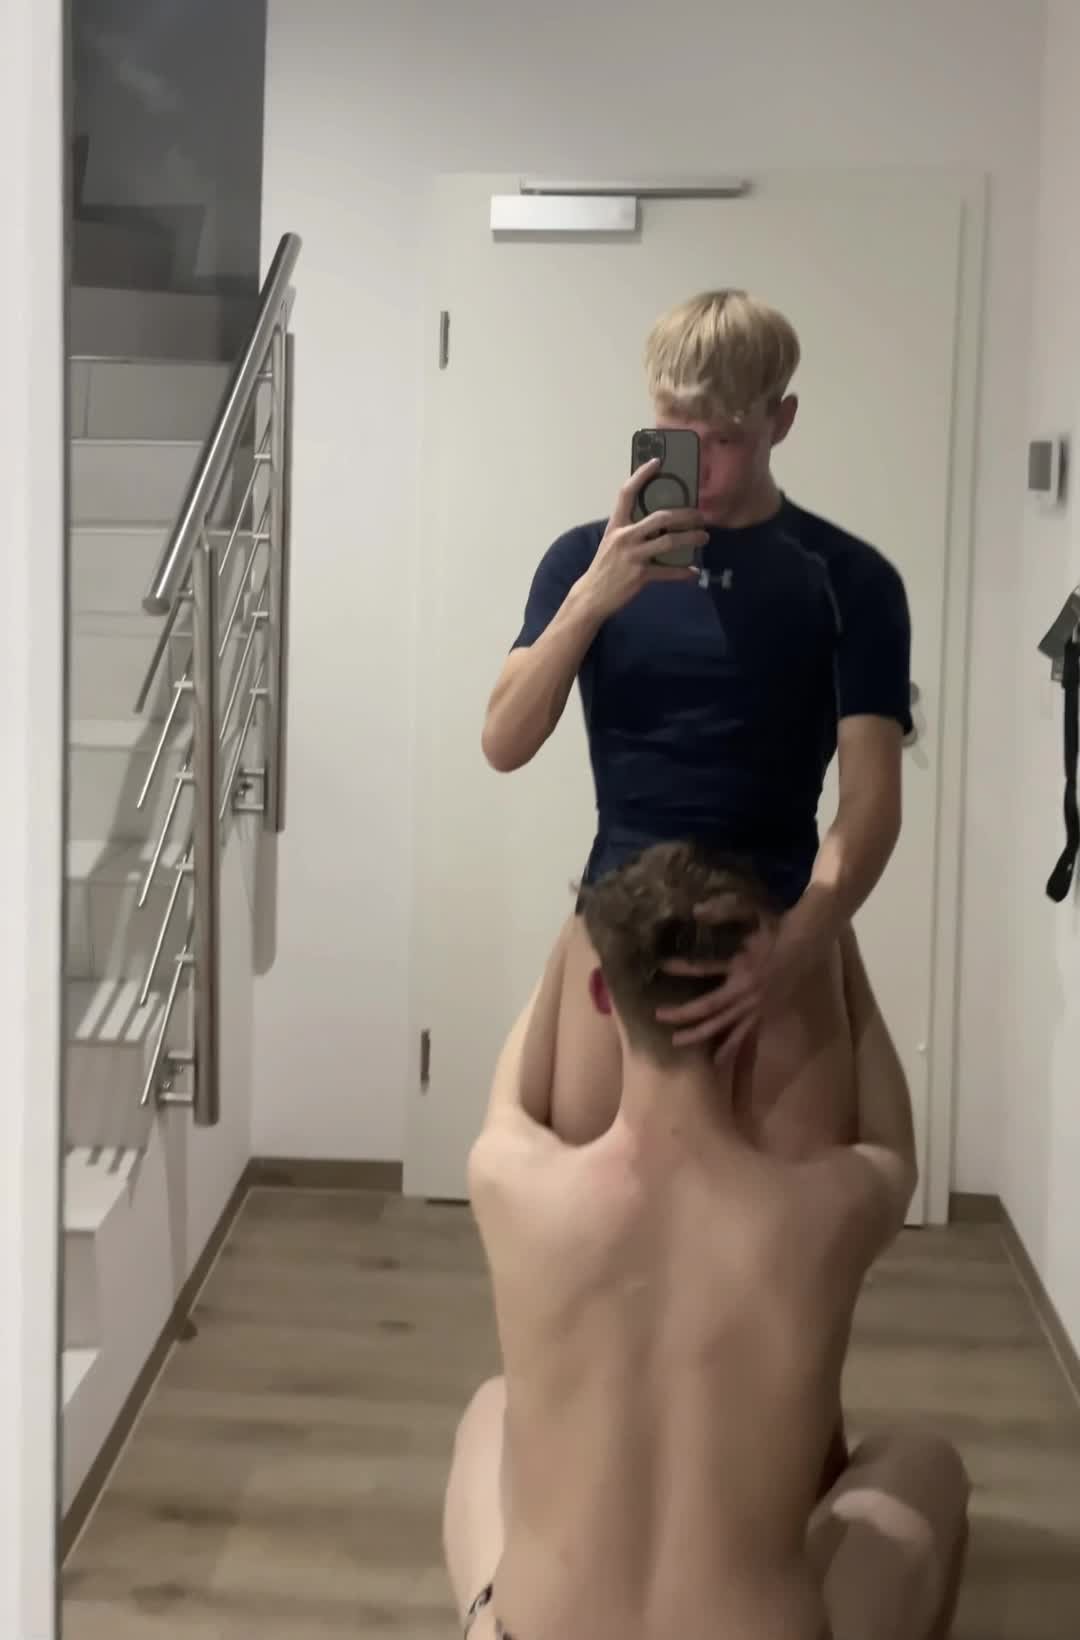 Watch the Video by jaayjakob with the username @jaayjakob, who is a verified user, posted on March 7, 2024. The post is about the topic Gay. and the text says 'My favorite toy 😈 

⇣ ⇣ ⇣  30% off⚡️ ⇣ ⇣ ⇣

onlyfans.com/jaayjakob'